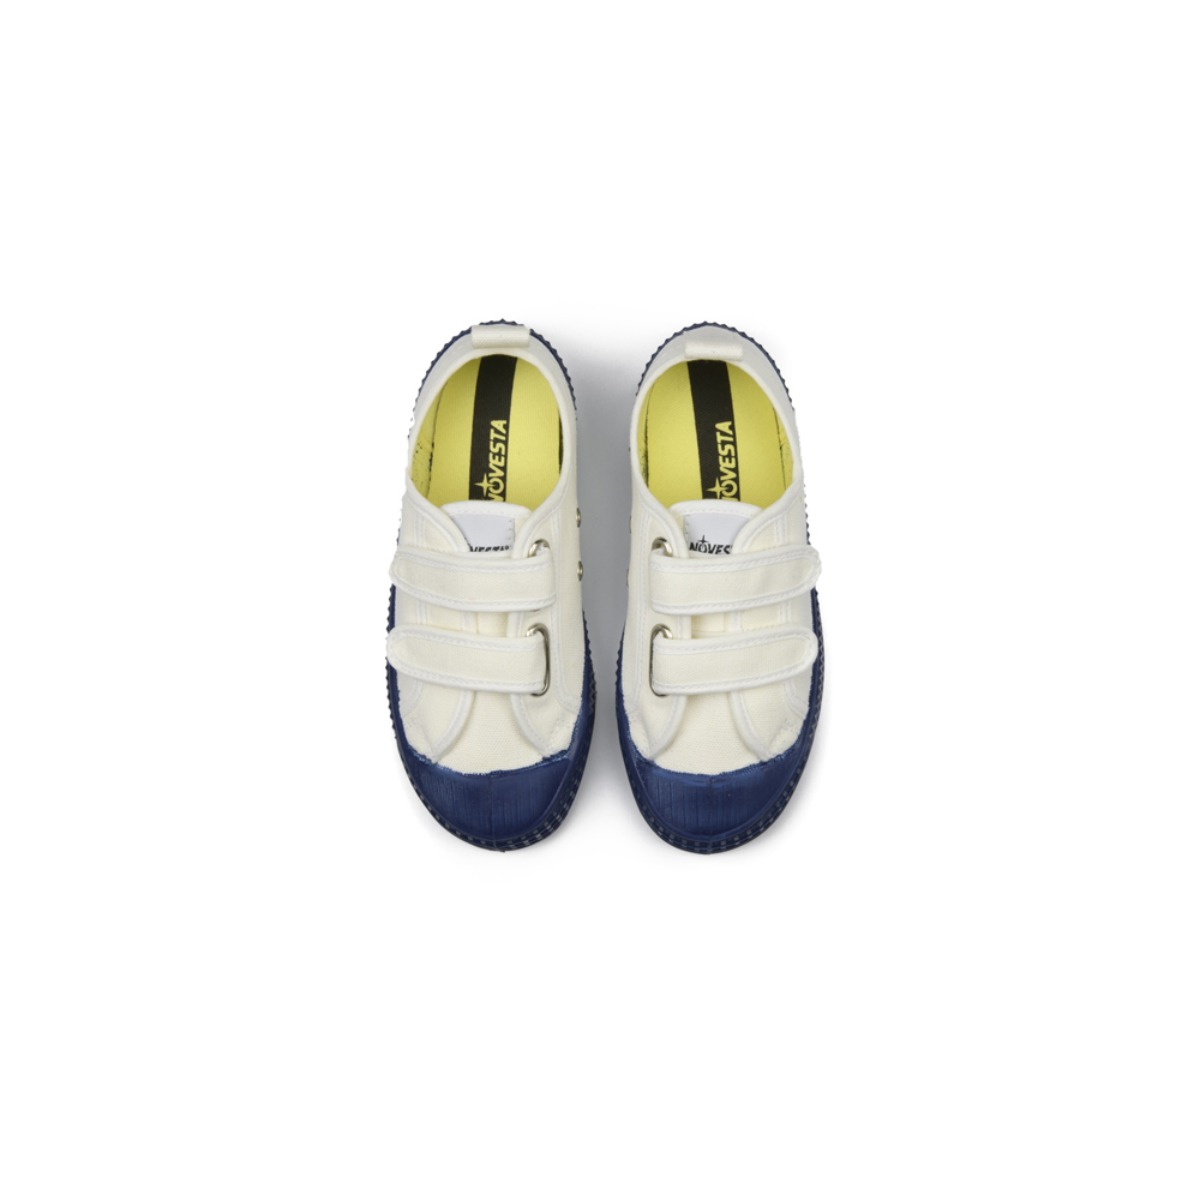 STAR MASTER KID VELCRO COLOR SOLE/WHITE/NAVY